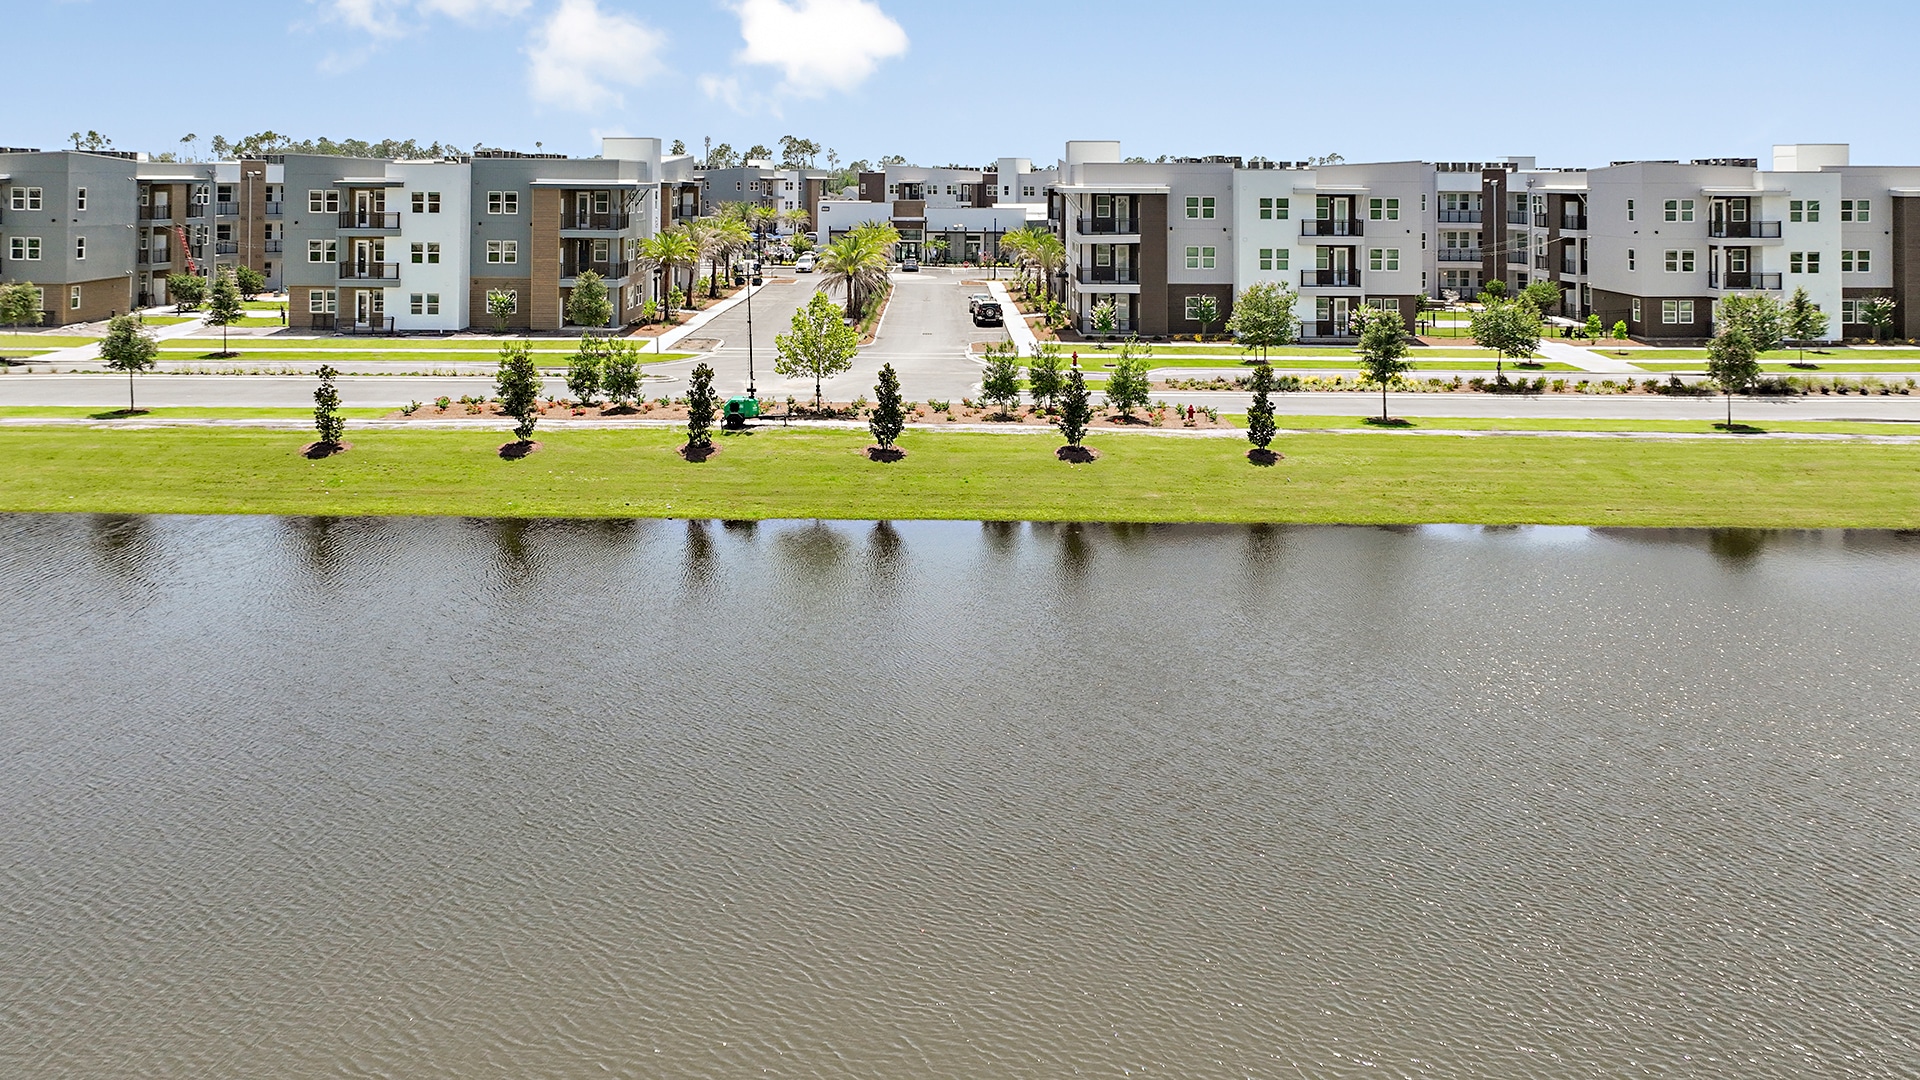 An aerial view of a residential area with a pond.